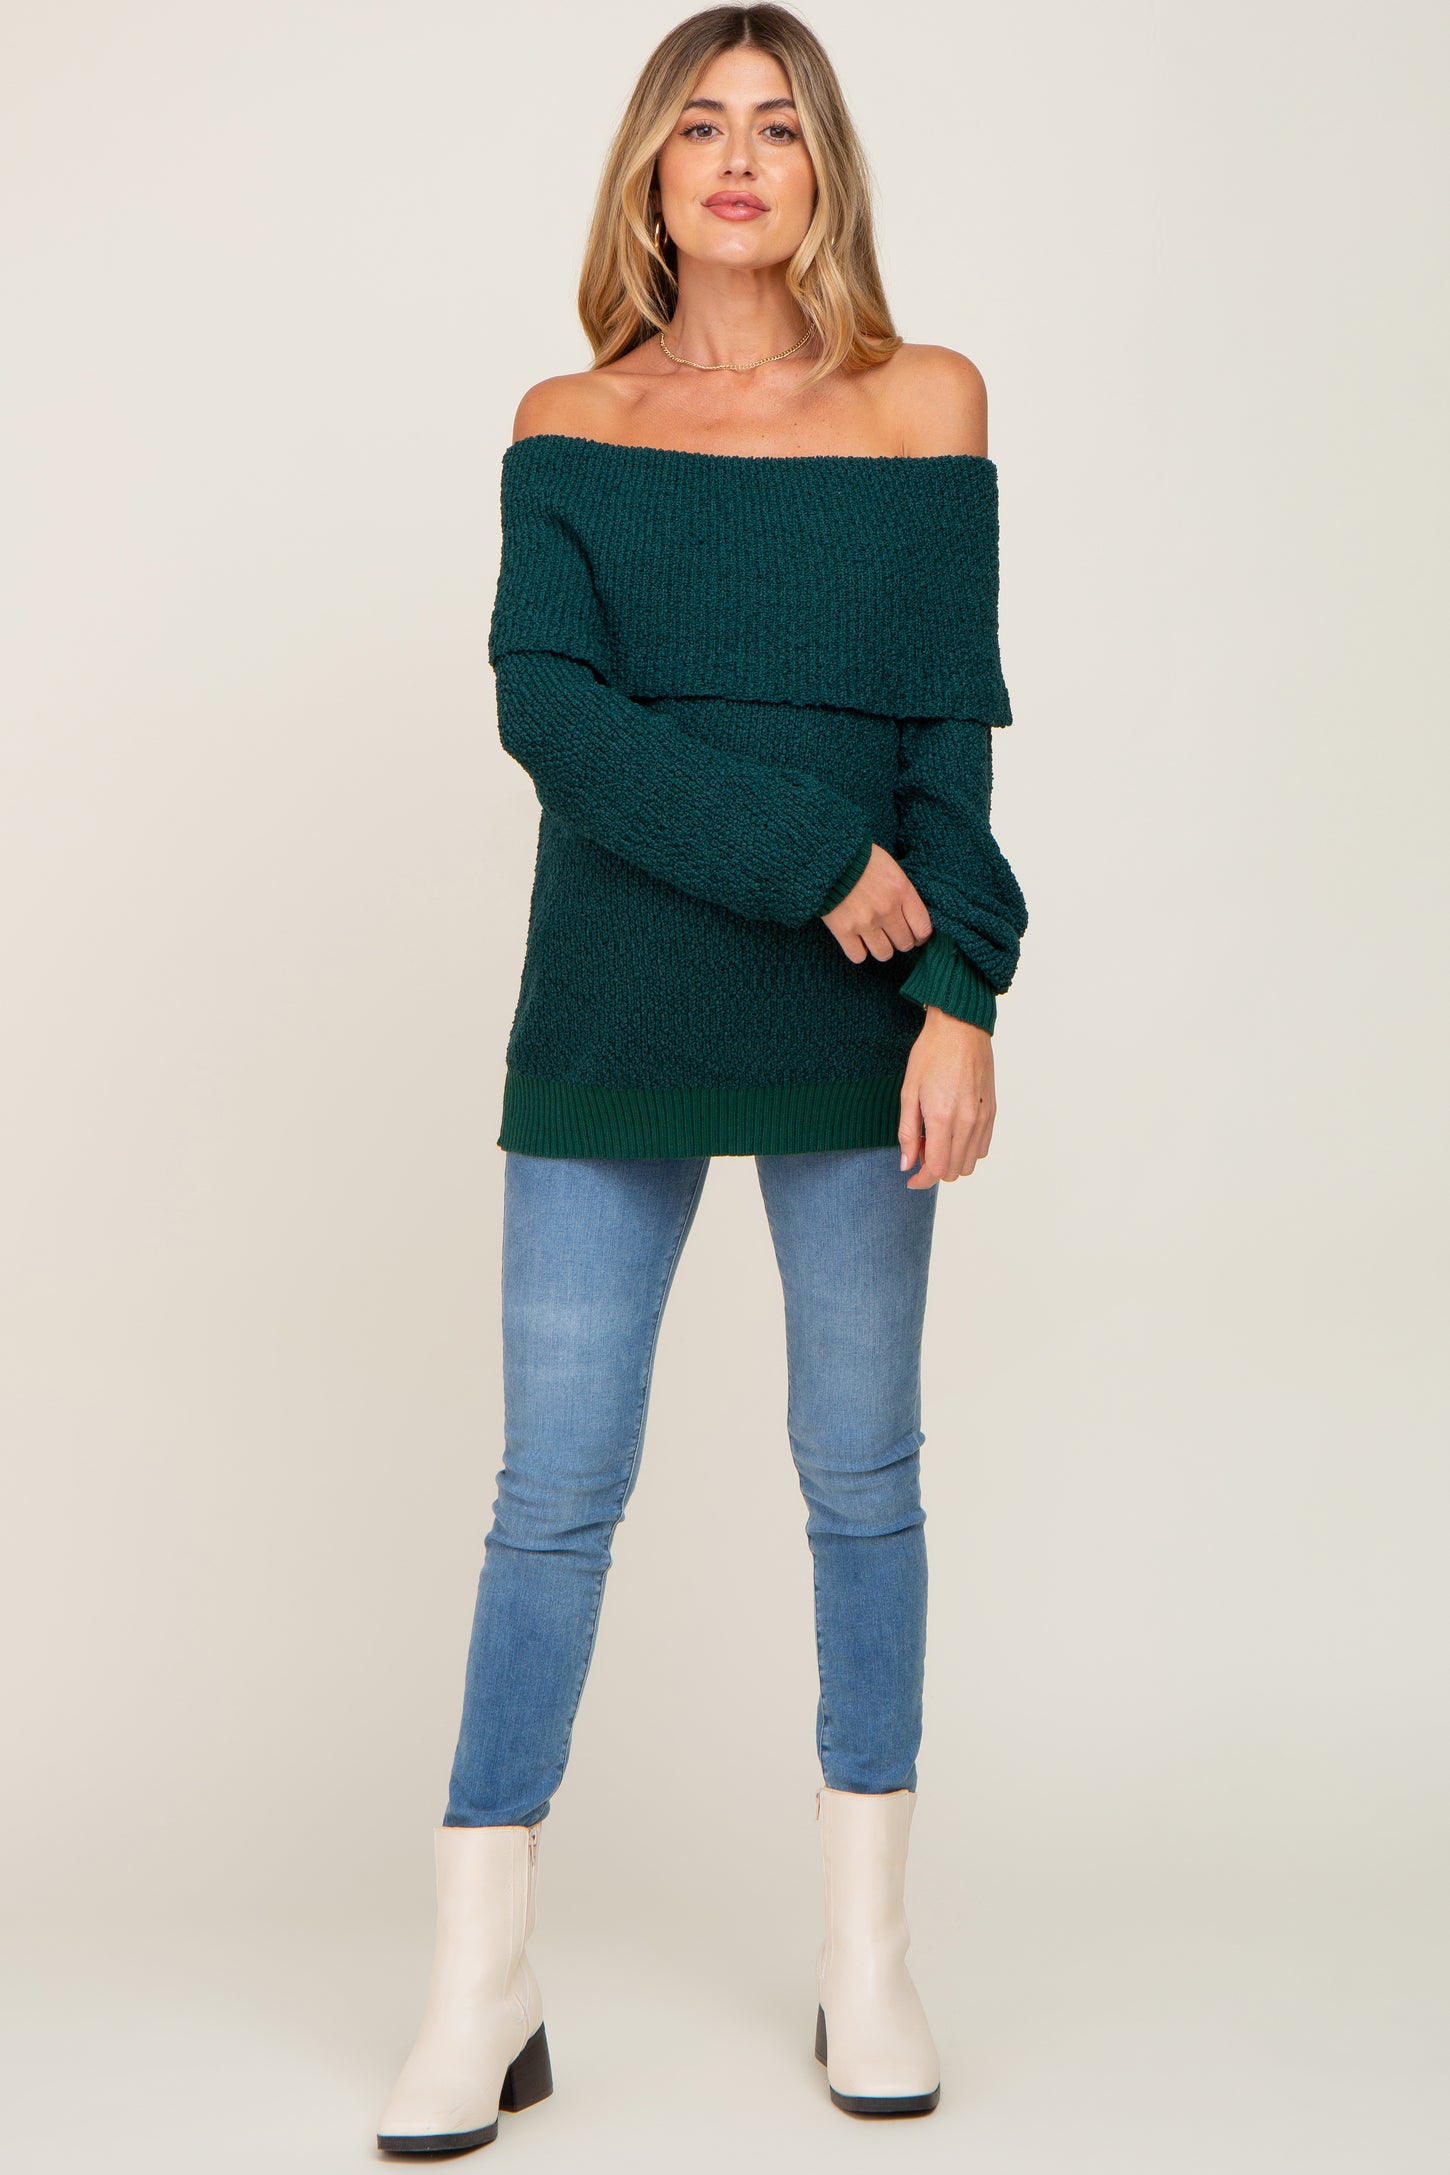 Forest Green Foldover Off Shoulder Maternity Sweater